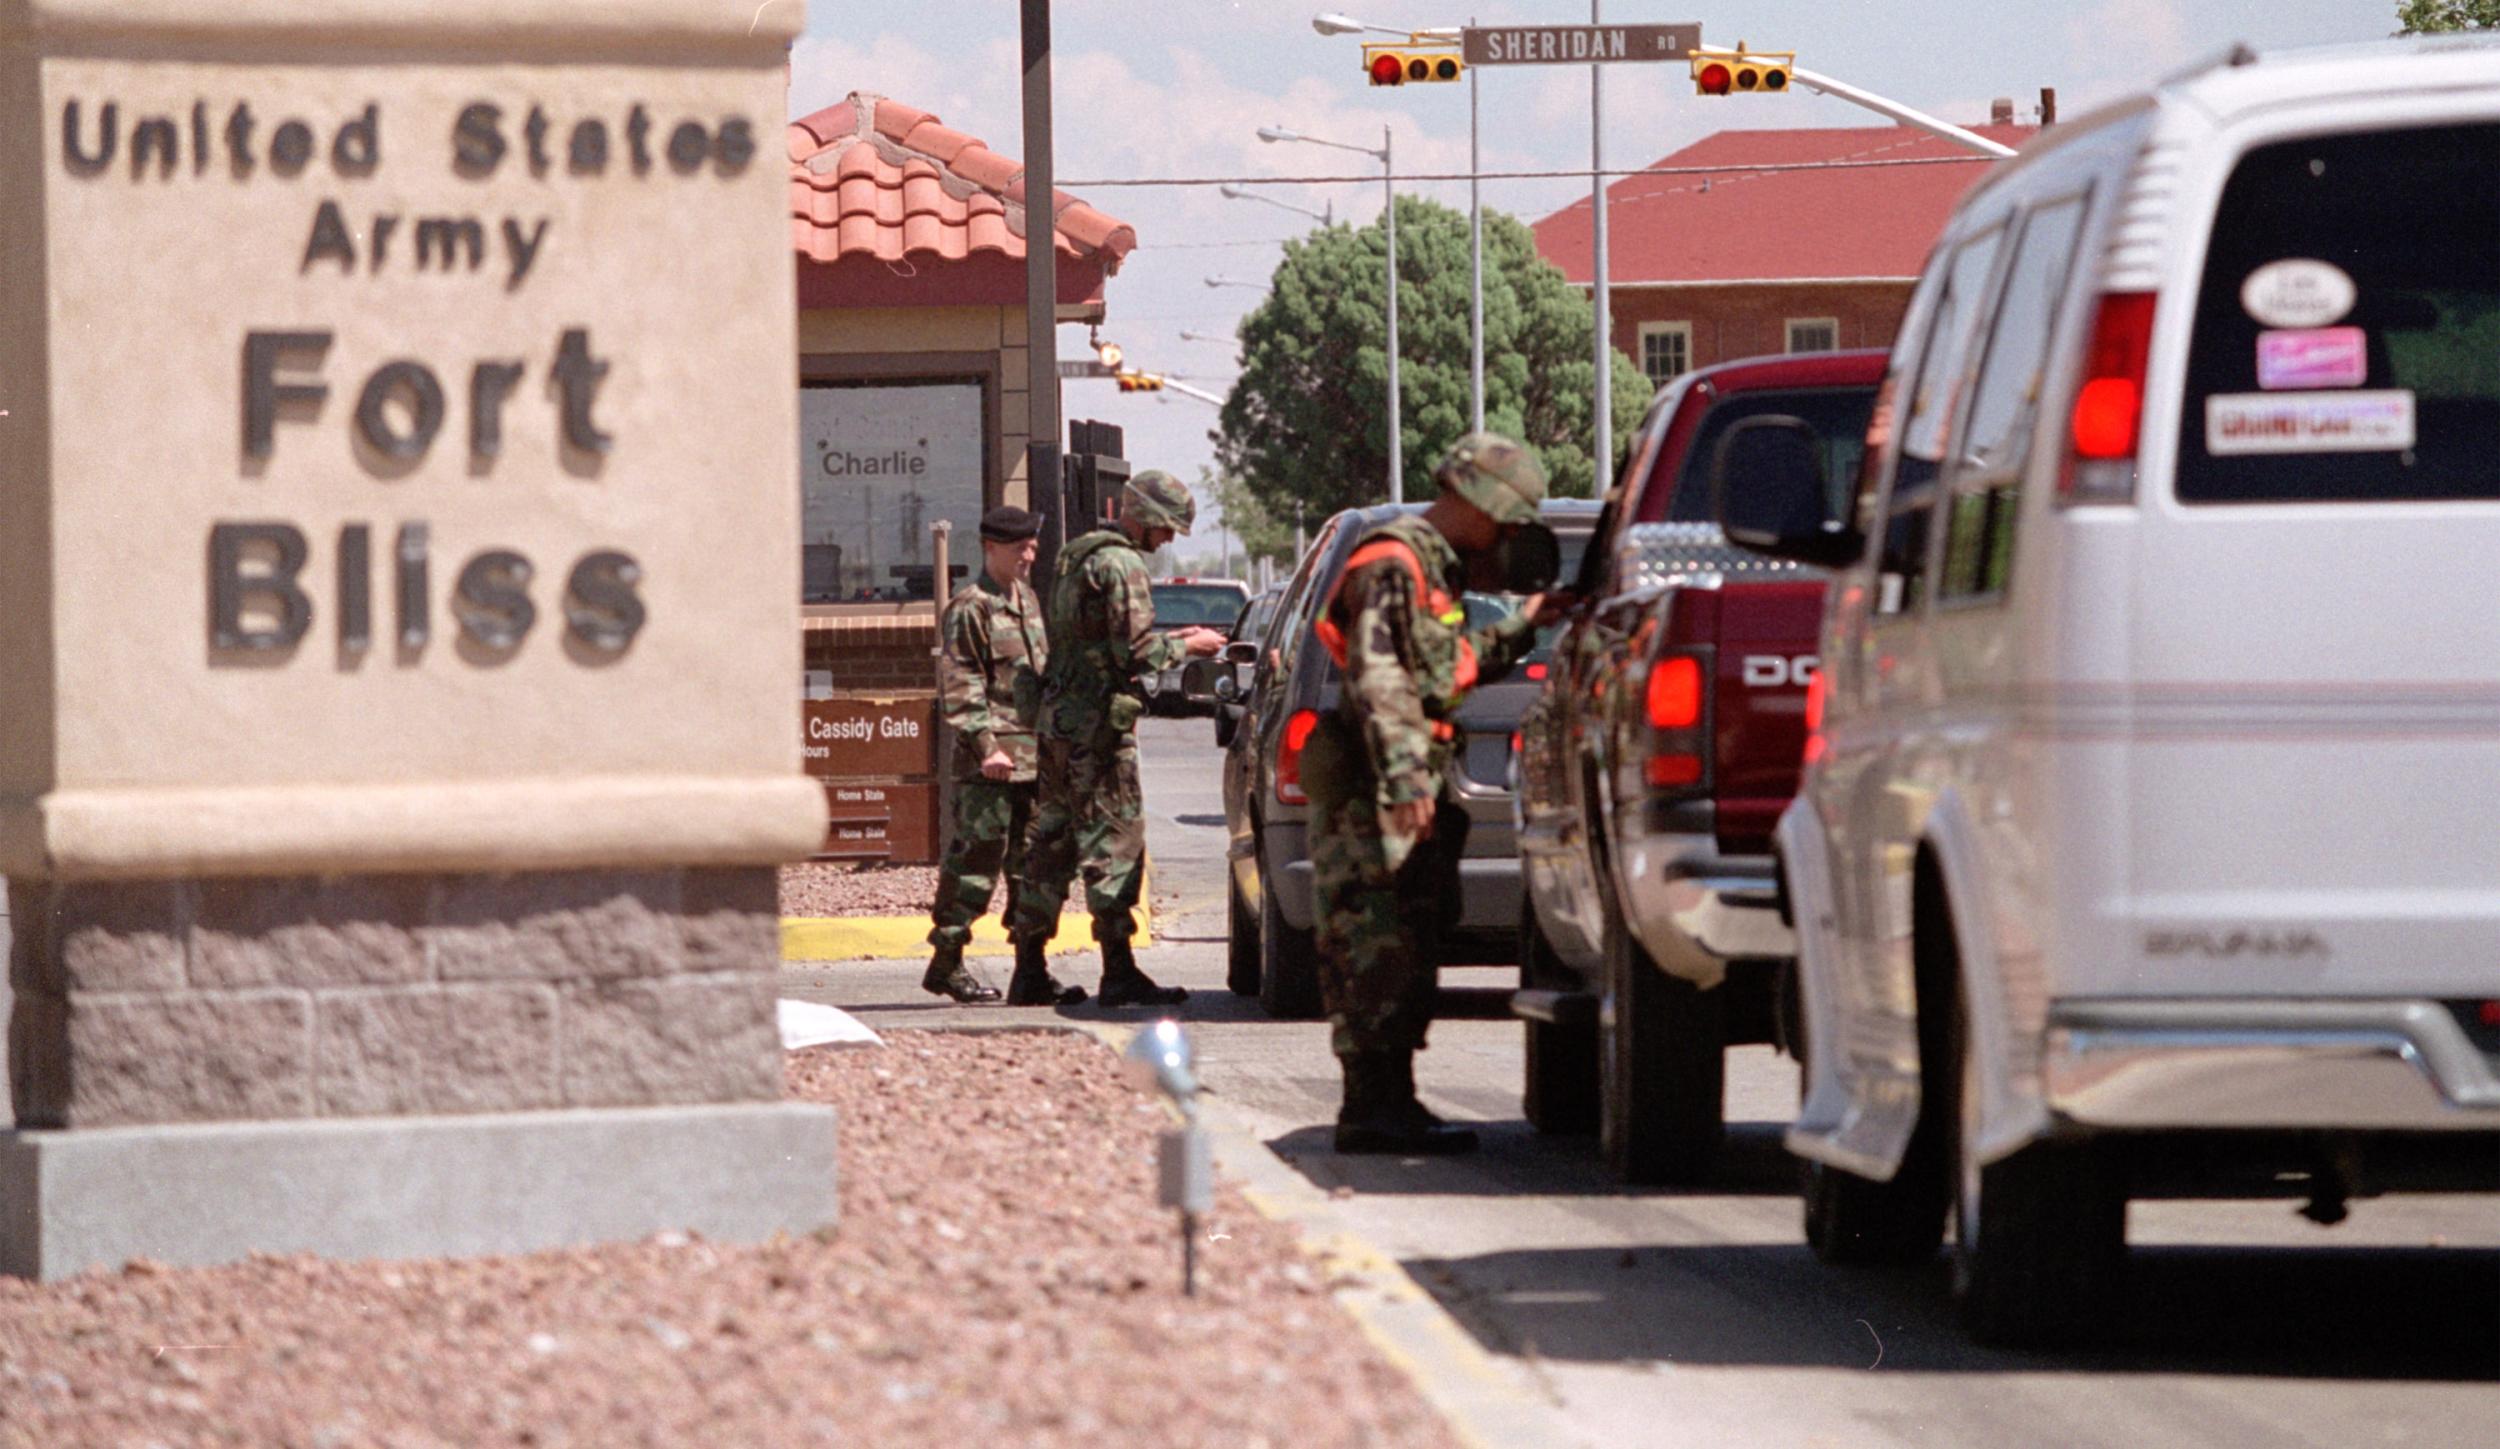 Gate Soldiers inspect all vehicles entering Fort Bliss, home of the United States Army Air Defense Artillery Centre